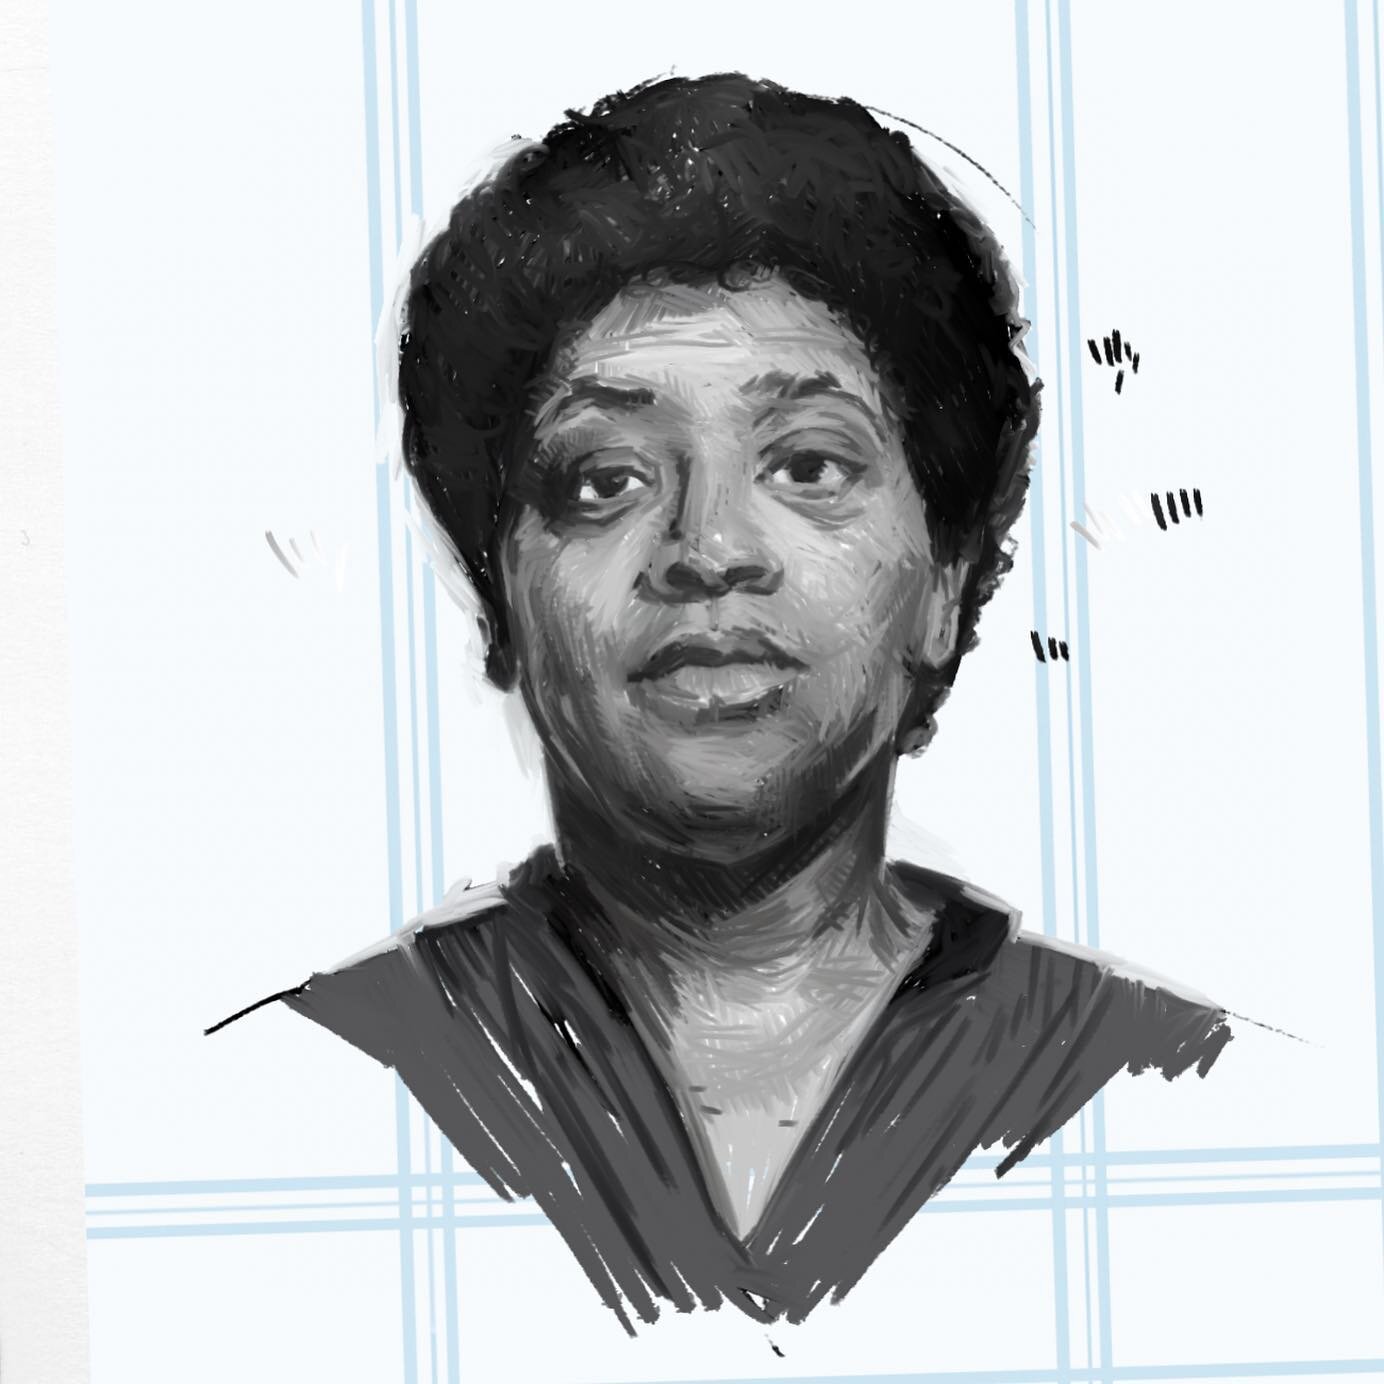 Doing a #warmupsketch today based on a portrait of #AudreLorde taken in 1983 by Jack Mitchell (swipe to see)!! What a great woman and poet.